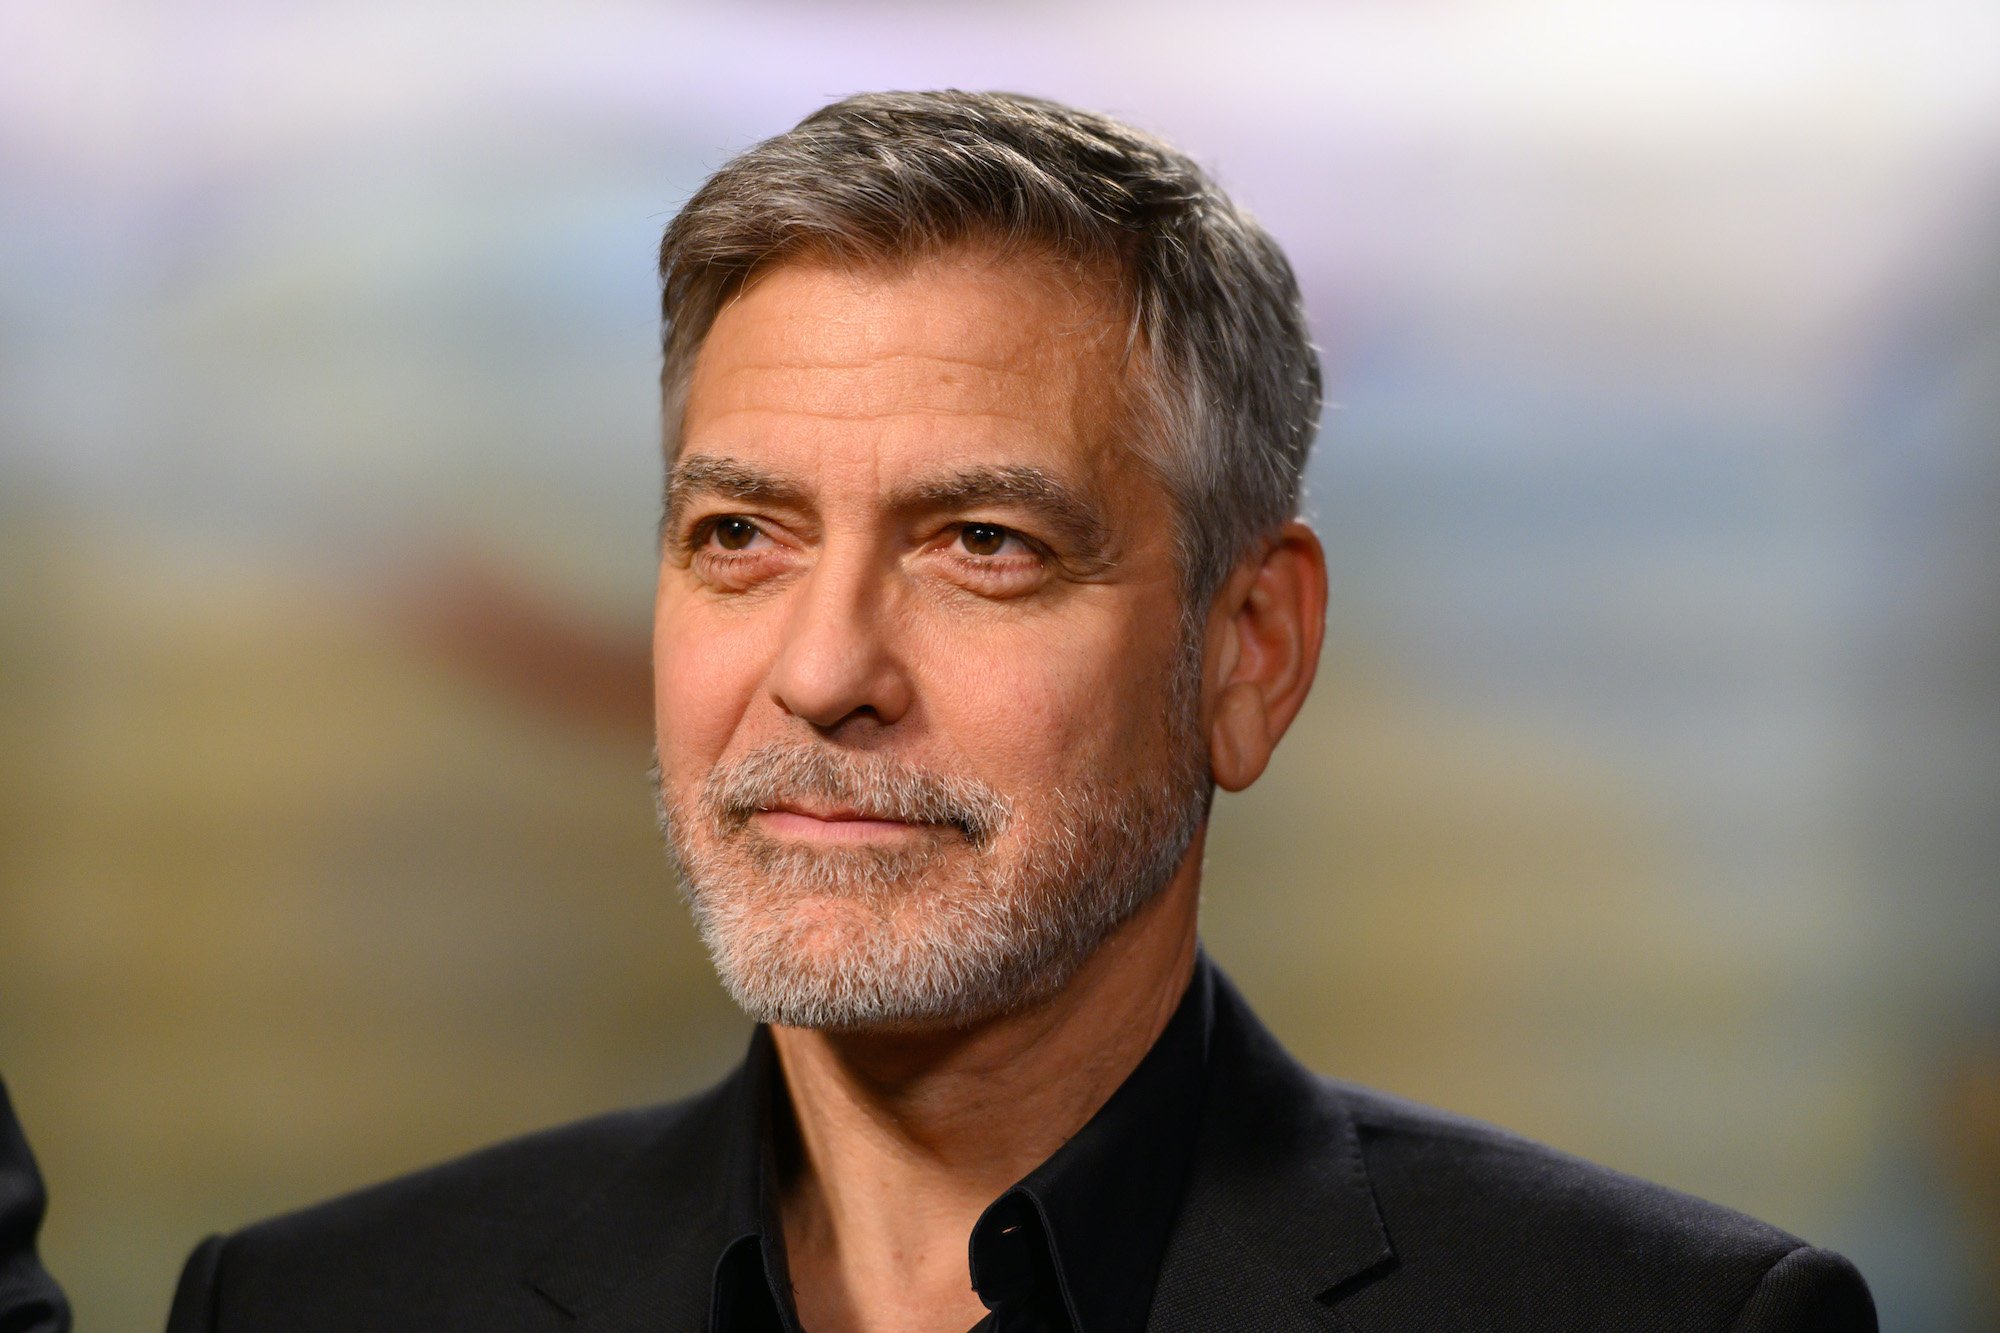 George Clooney’s Injuries From 1 Role Were So Severe He Considered Suicide